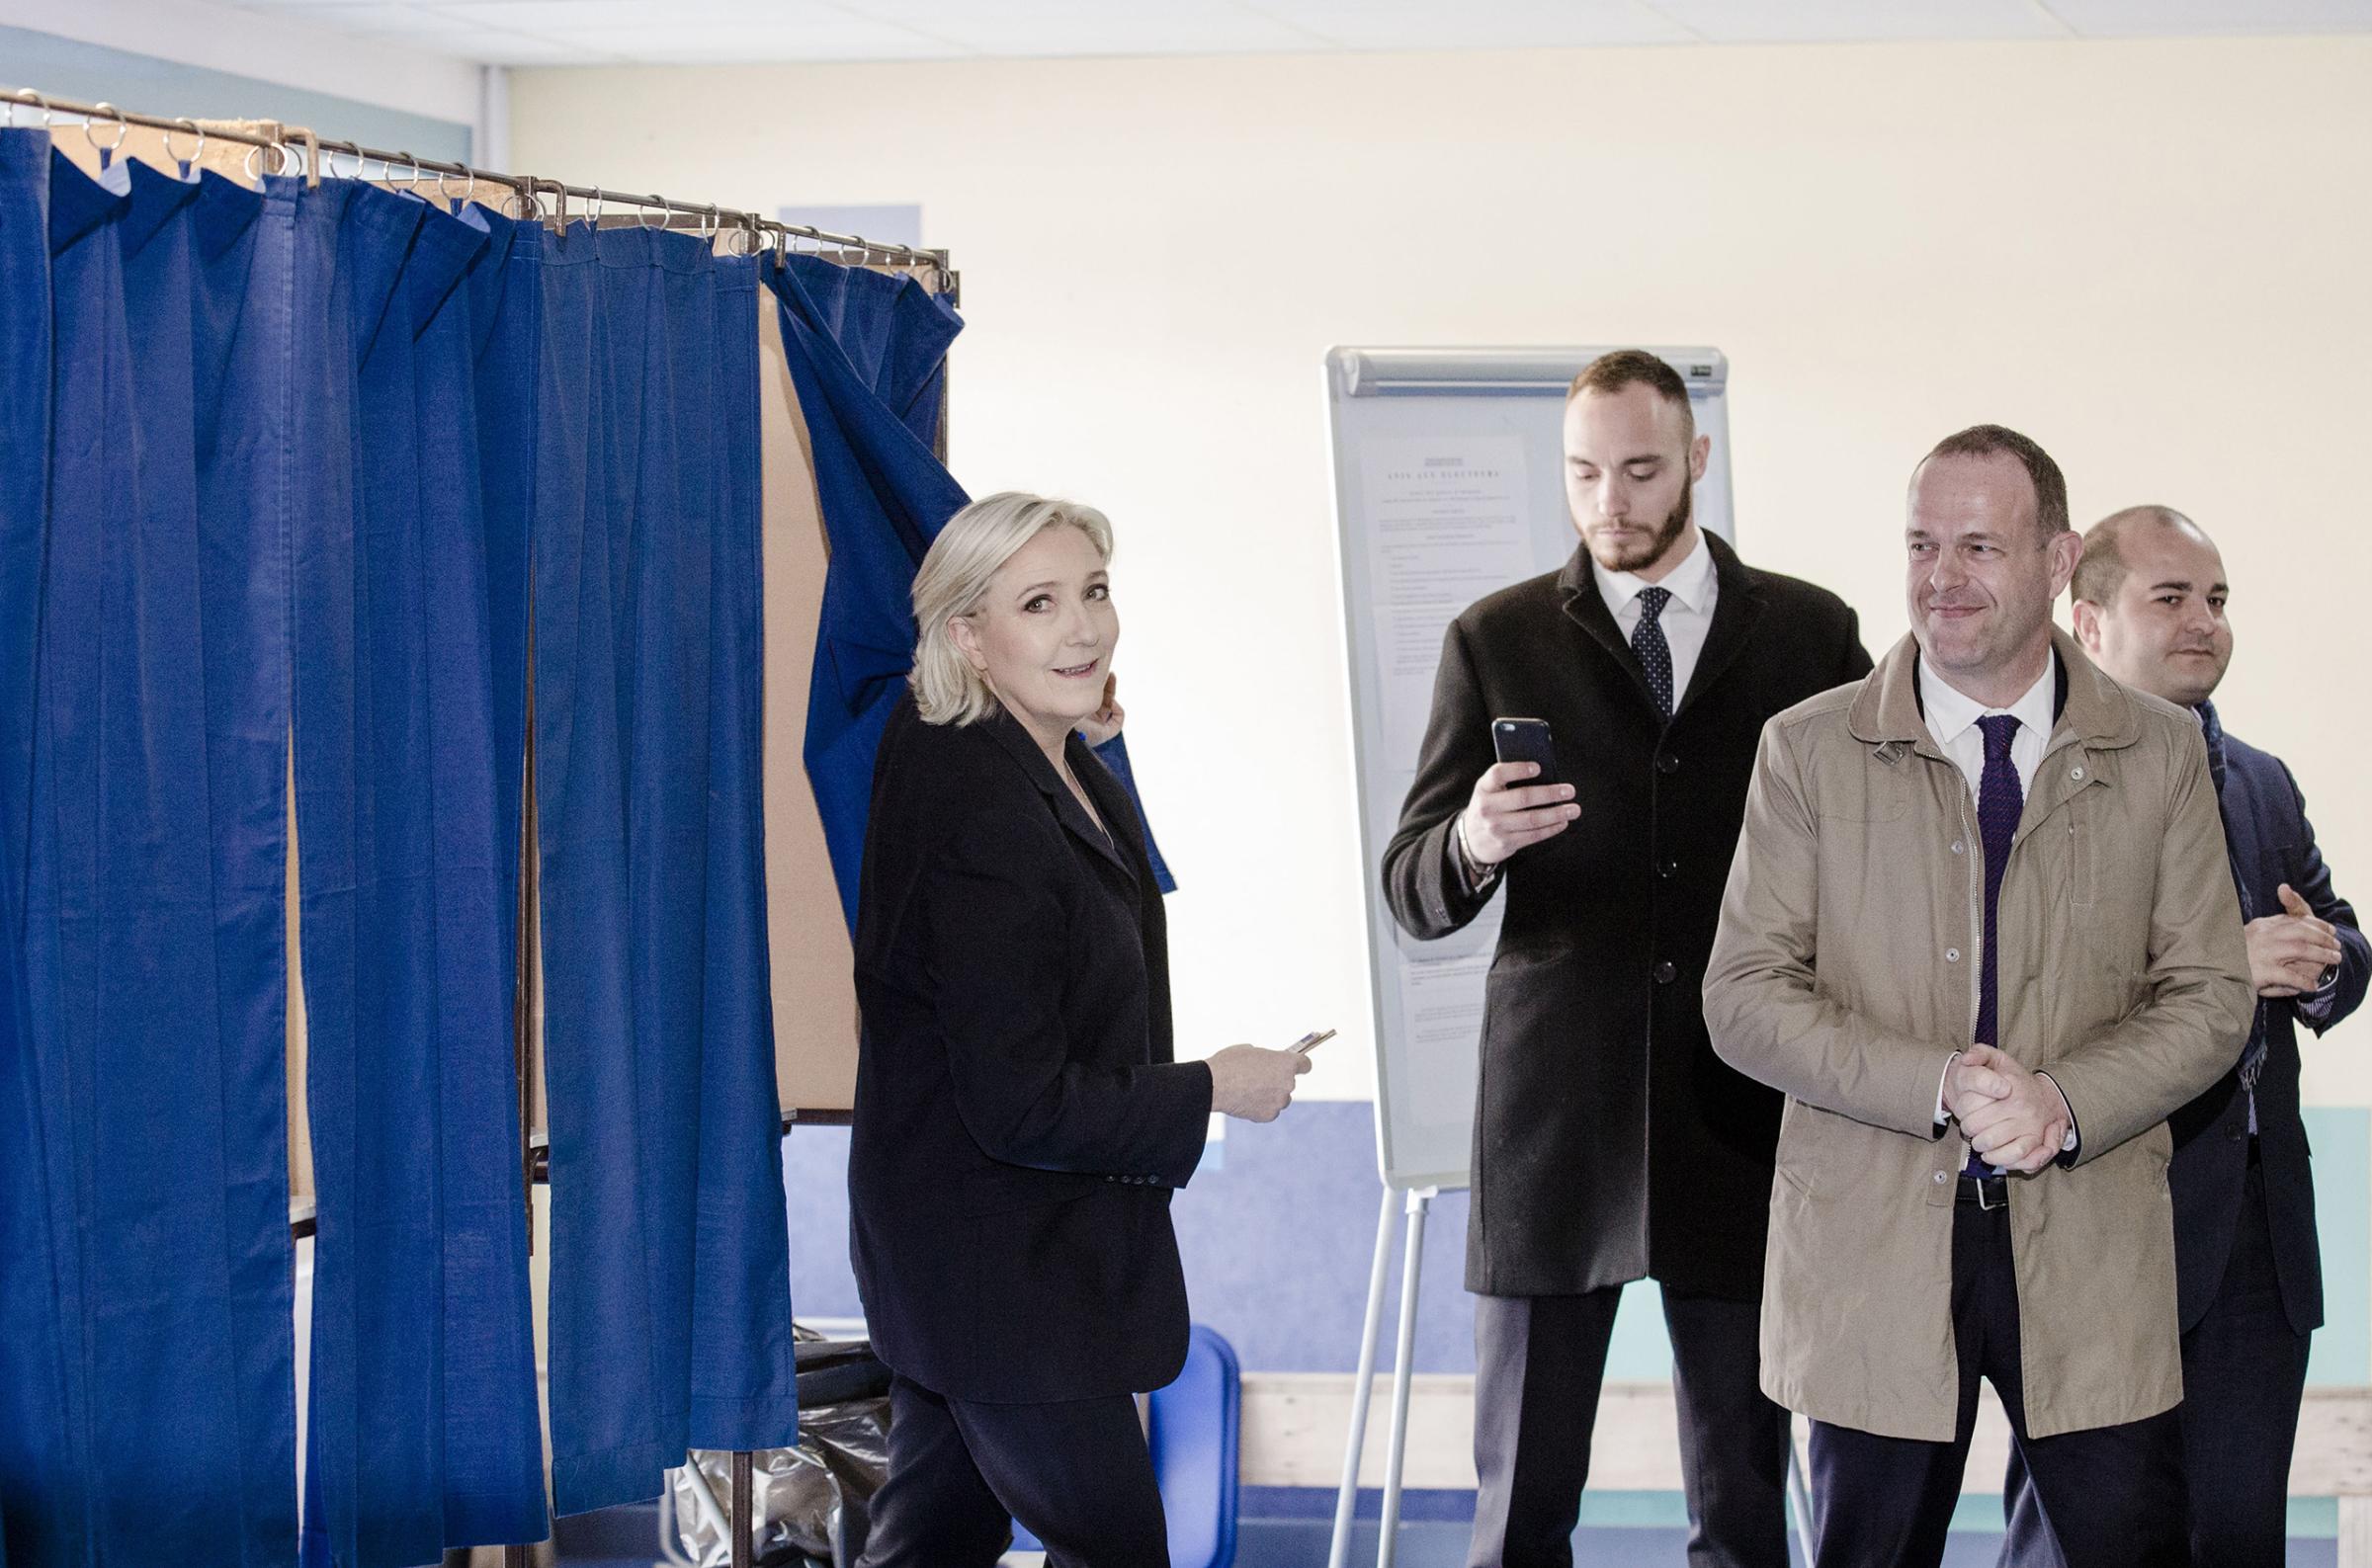 Marine Le Pen, leader of the National Front, exits a polling booth after marking her ballot during the first round of the French presidential election in Henin Beaumont on April 23, 2017.